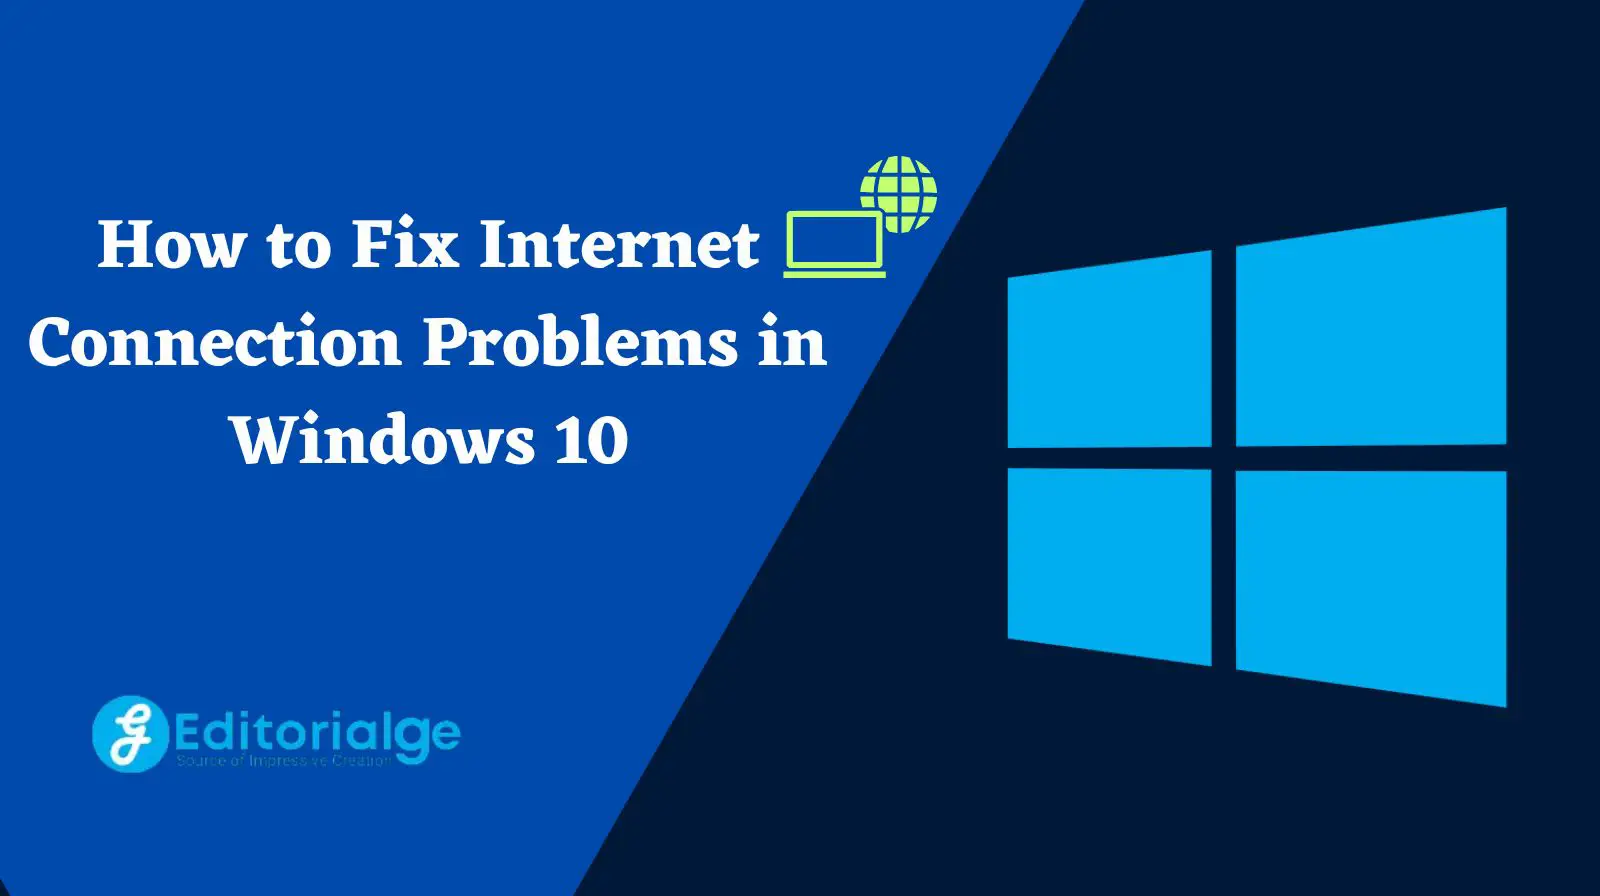 How to Fix Internet Connection Problems in Windows 10